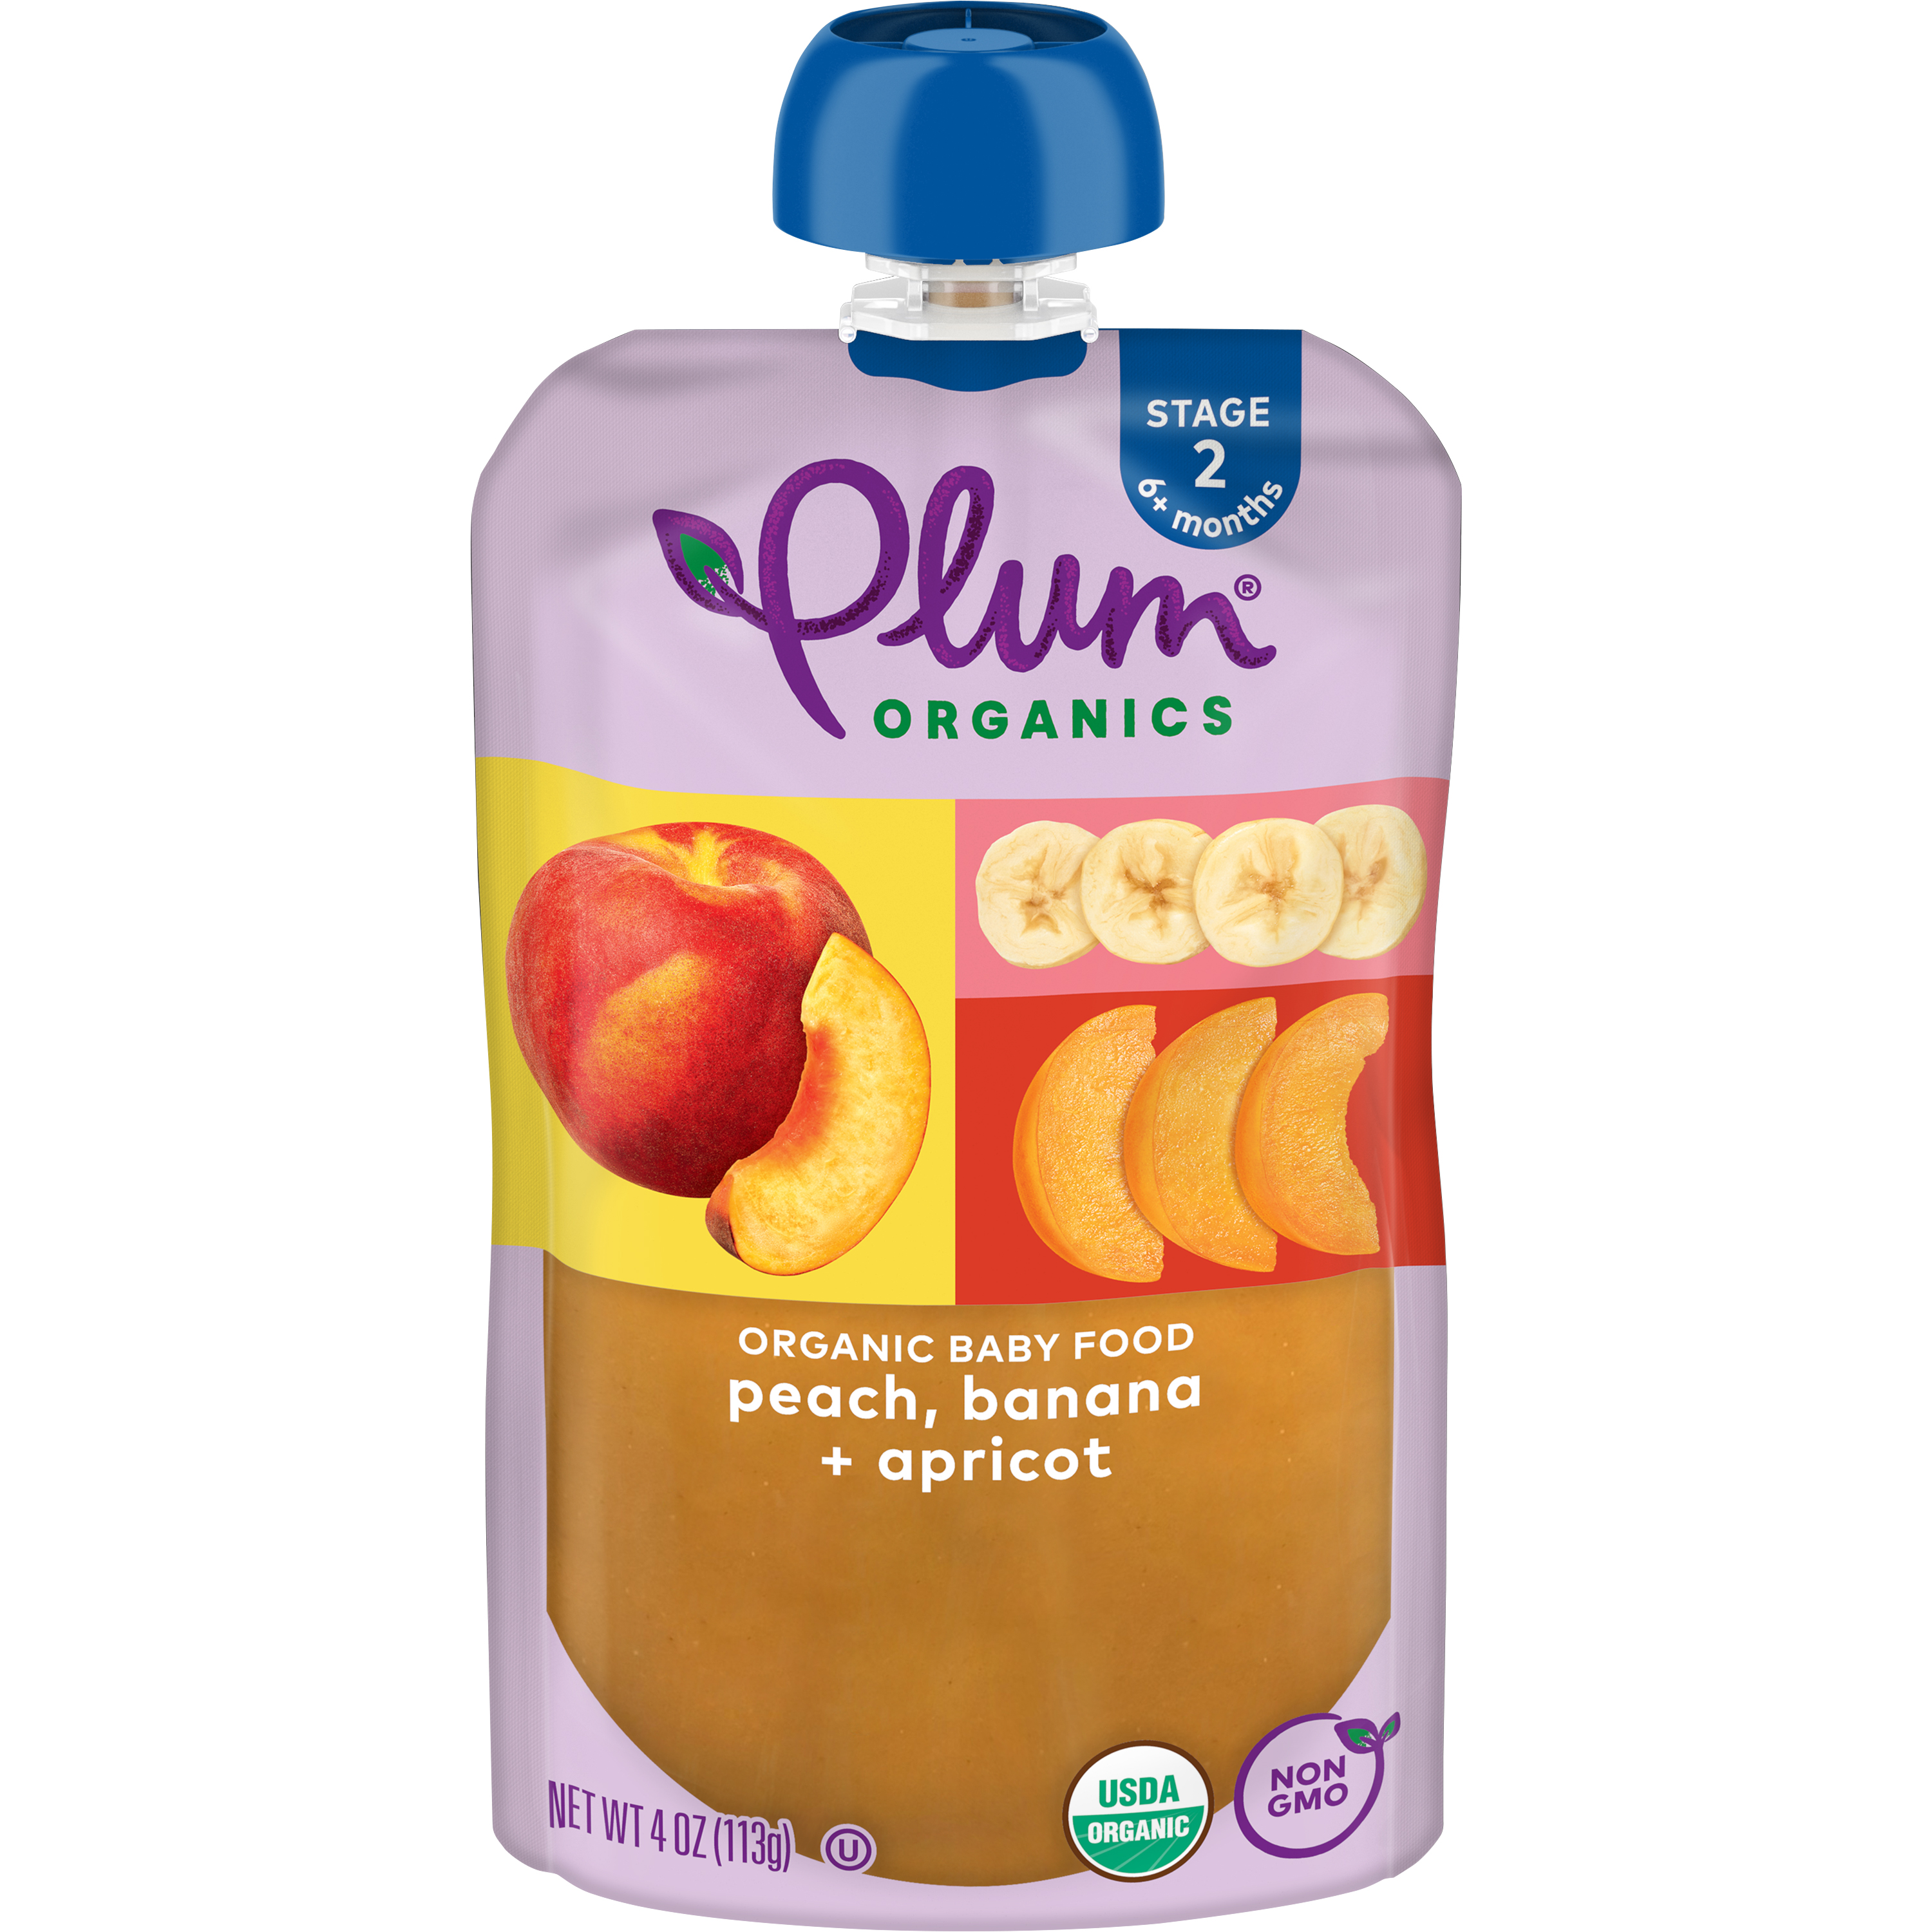 Plum Organics Stage 2 Organic Baby Food Pouches: Peach, Banana, Apricot - 4 oz, 6 Pack - image 3 of 10